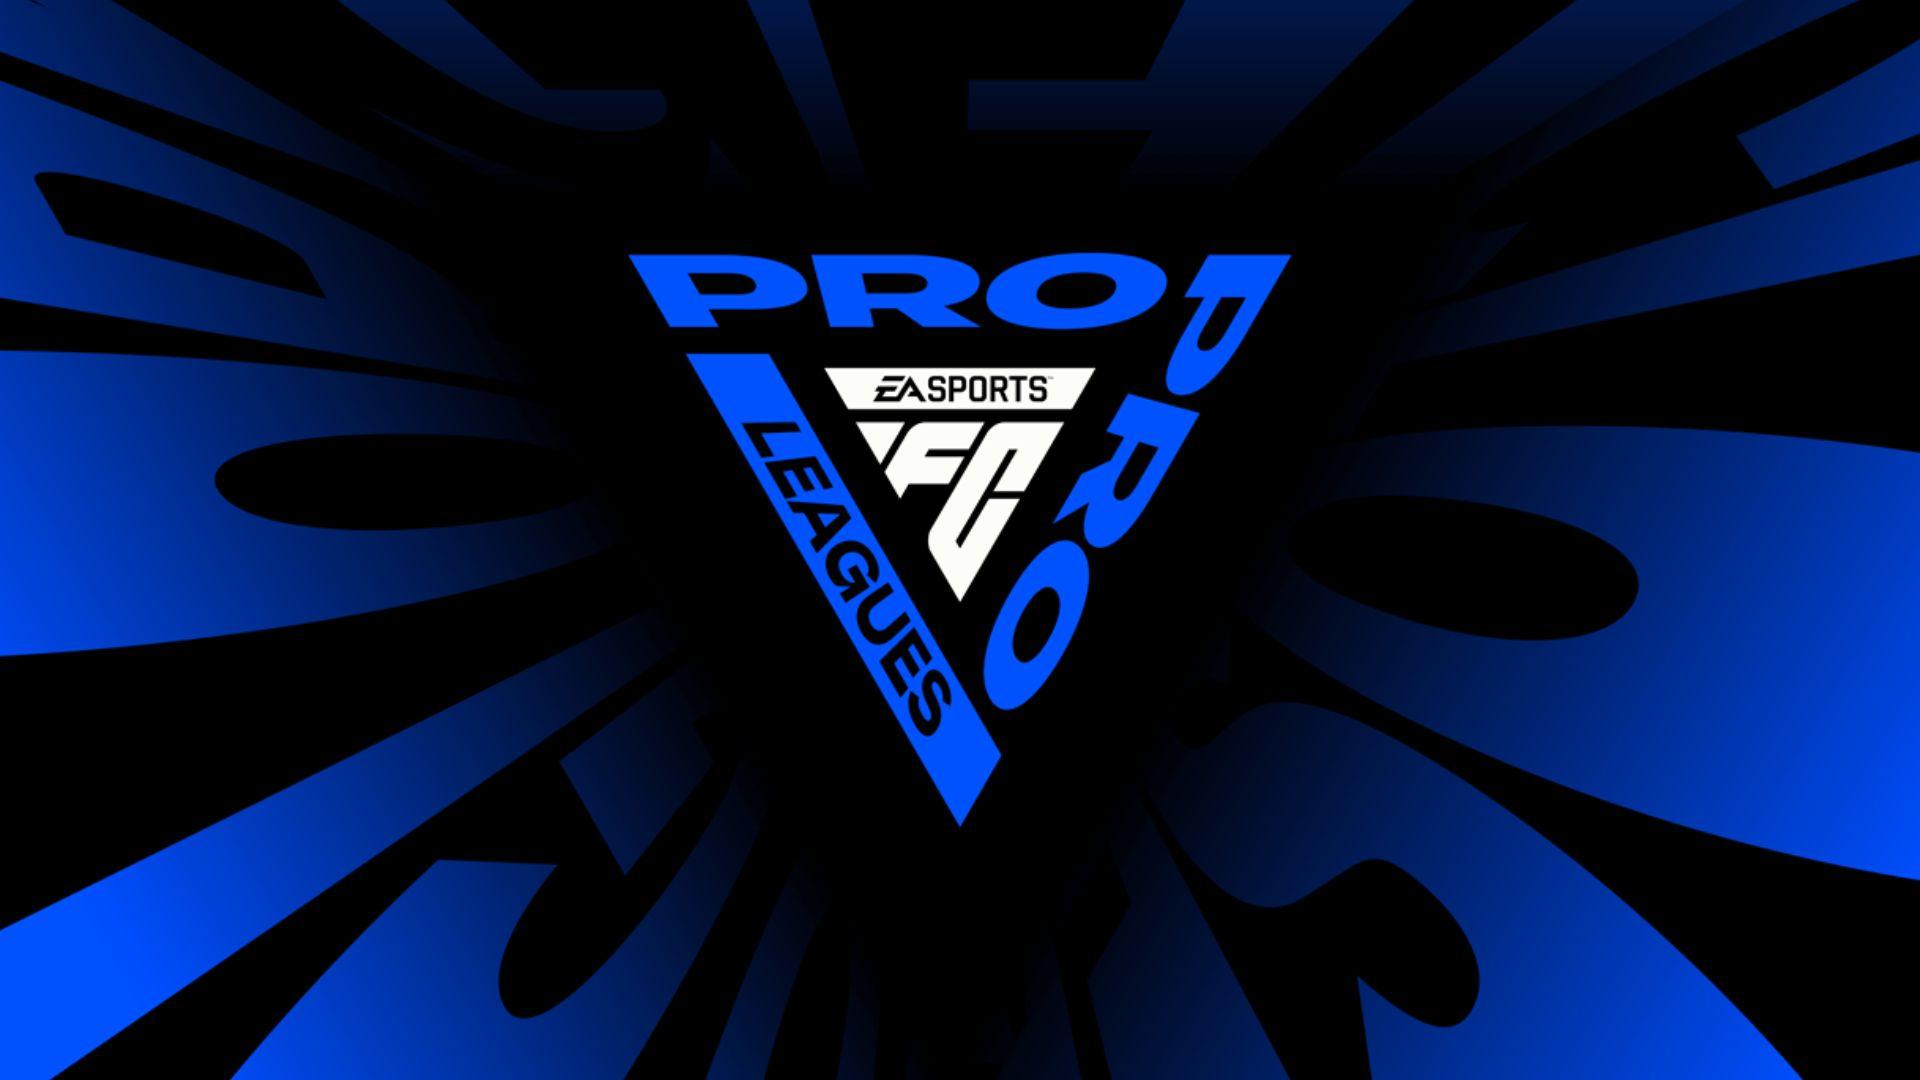 EA SPORTS FC Pro leagues logo in blue and black